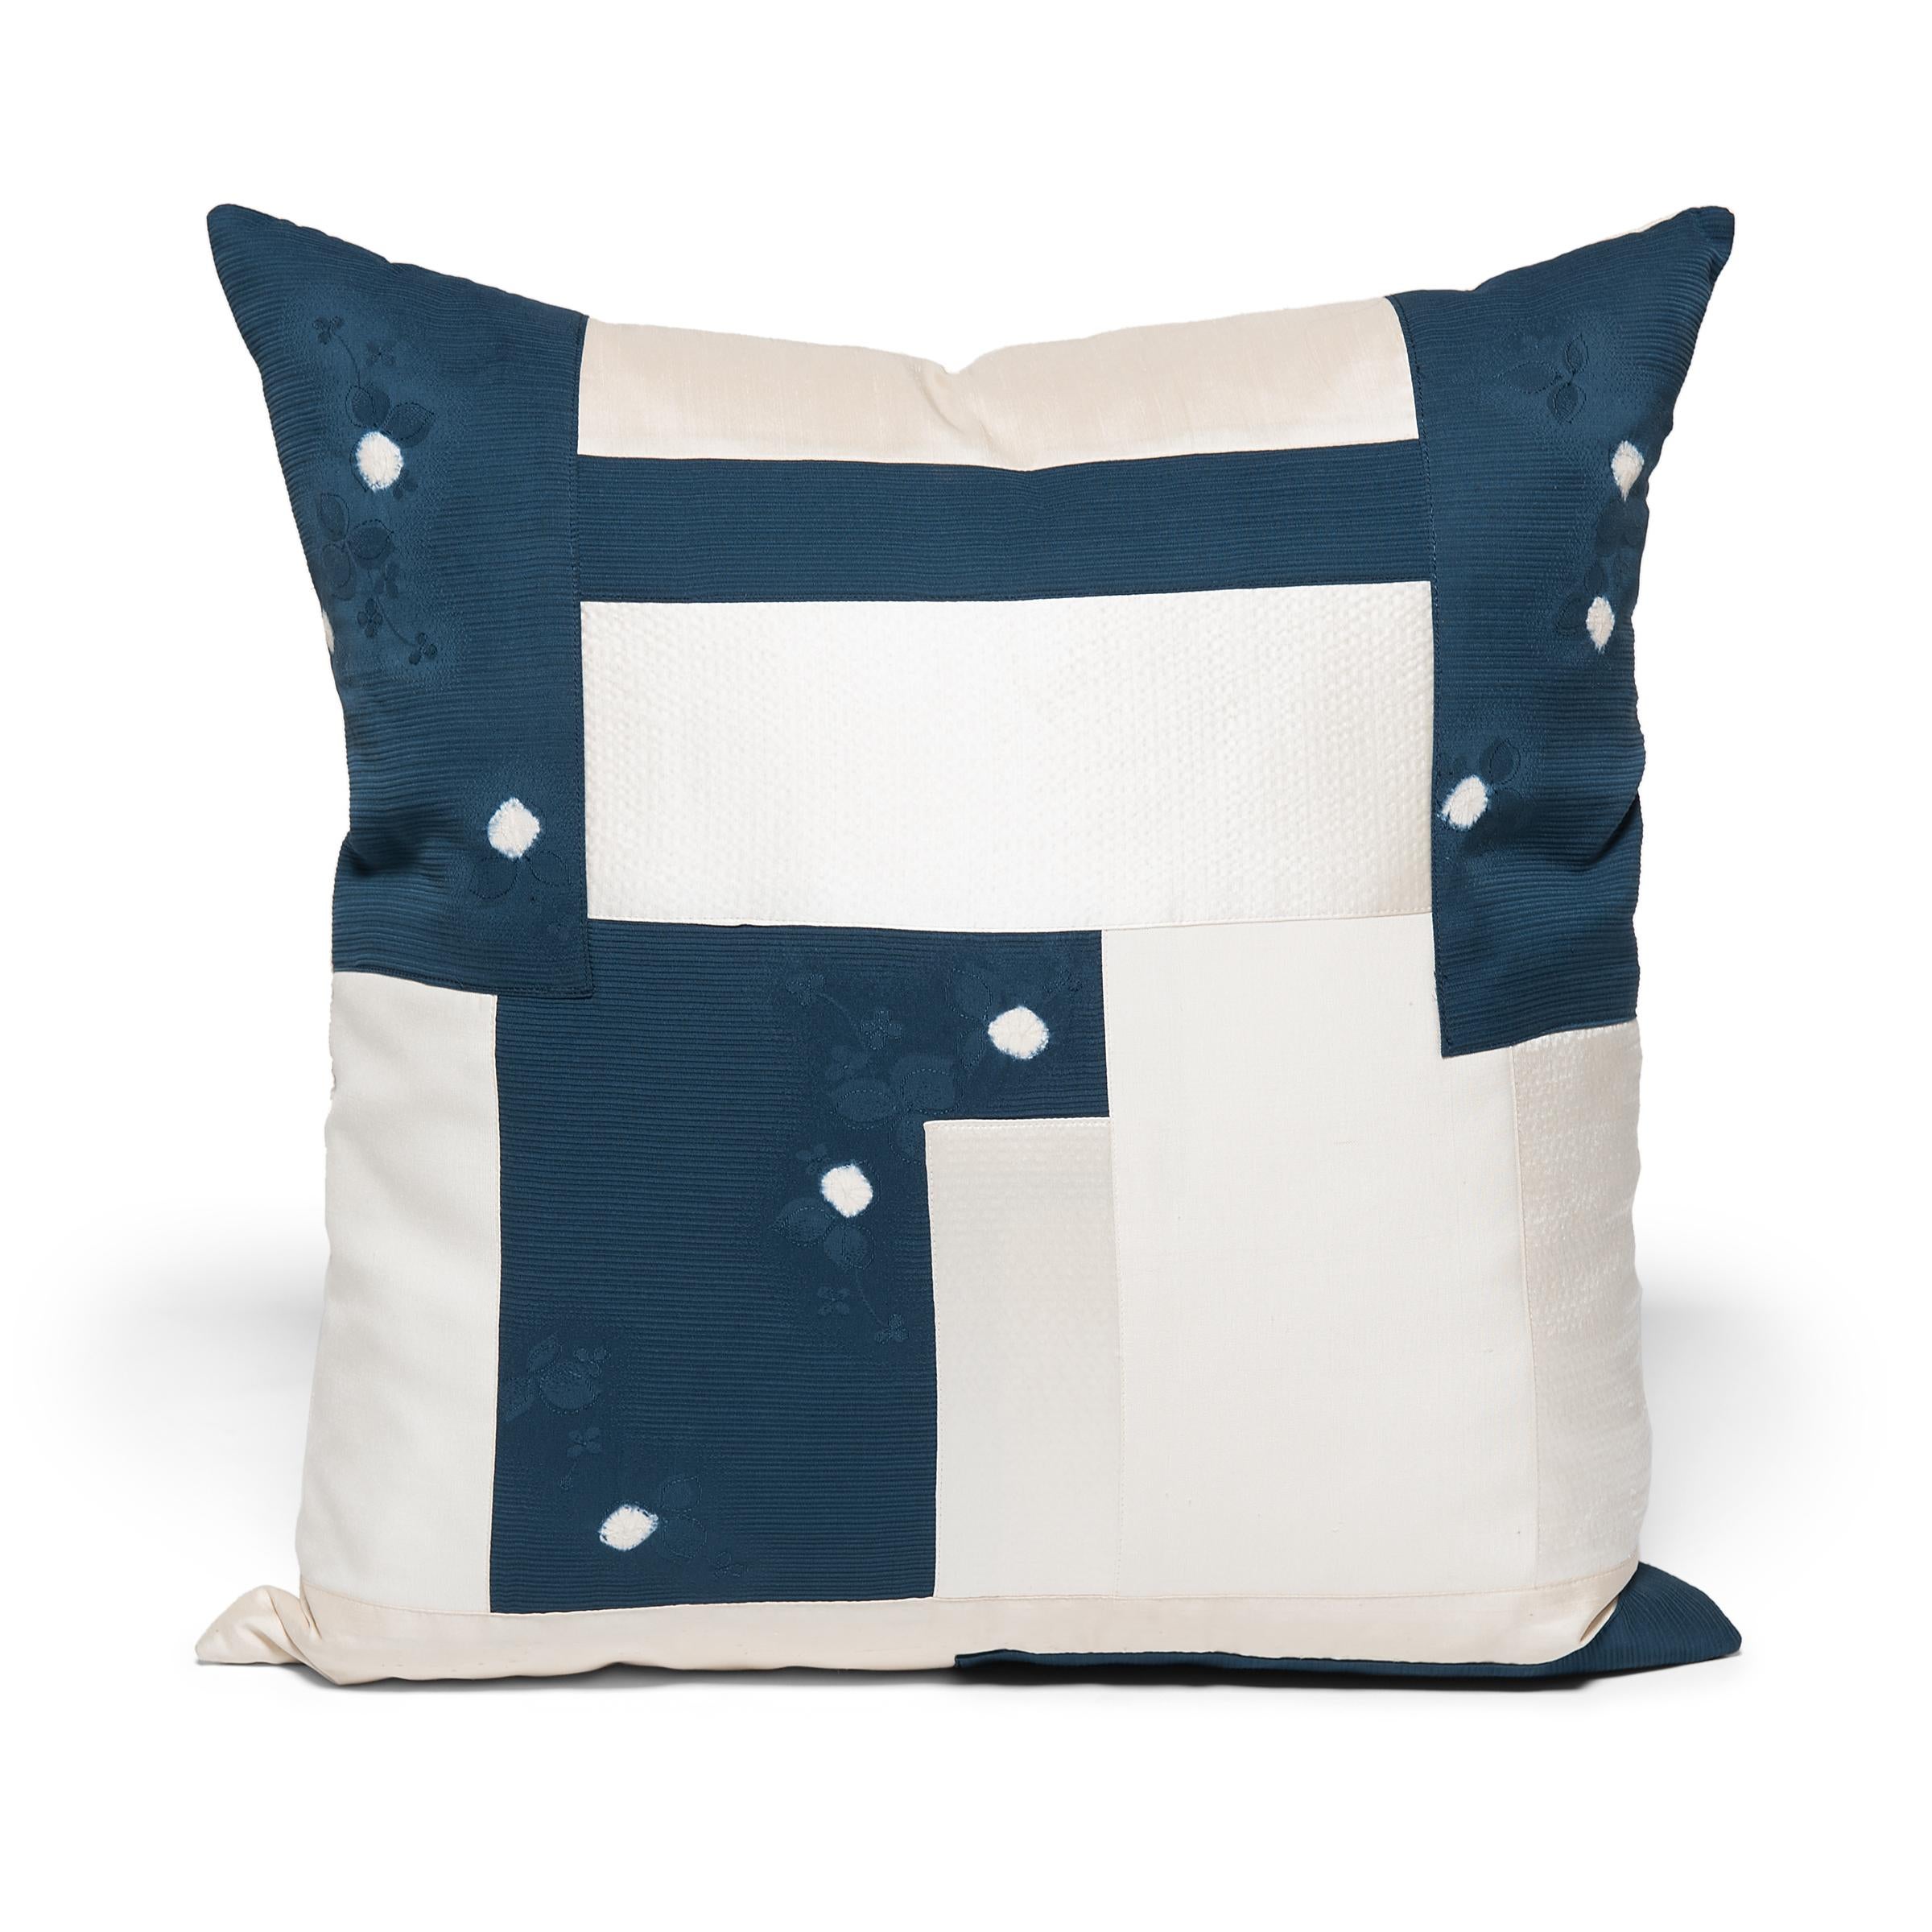 The Chinese and Japanese silk techniques that combine to form this pair of contemporary pillows are fundamental to the formation of contemporary fashion aesthetics. Shibori is an ancient Japanese form of cloth dying and the basis of tie-dye and